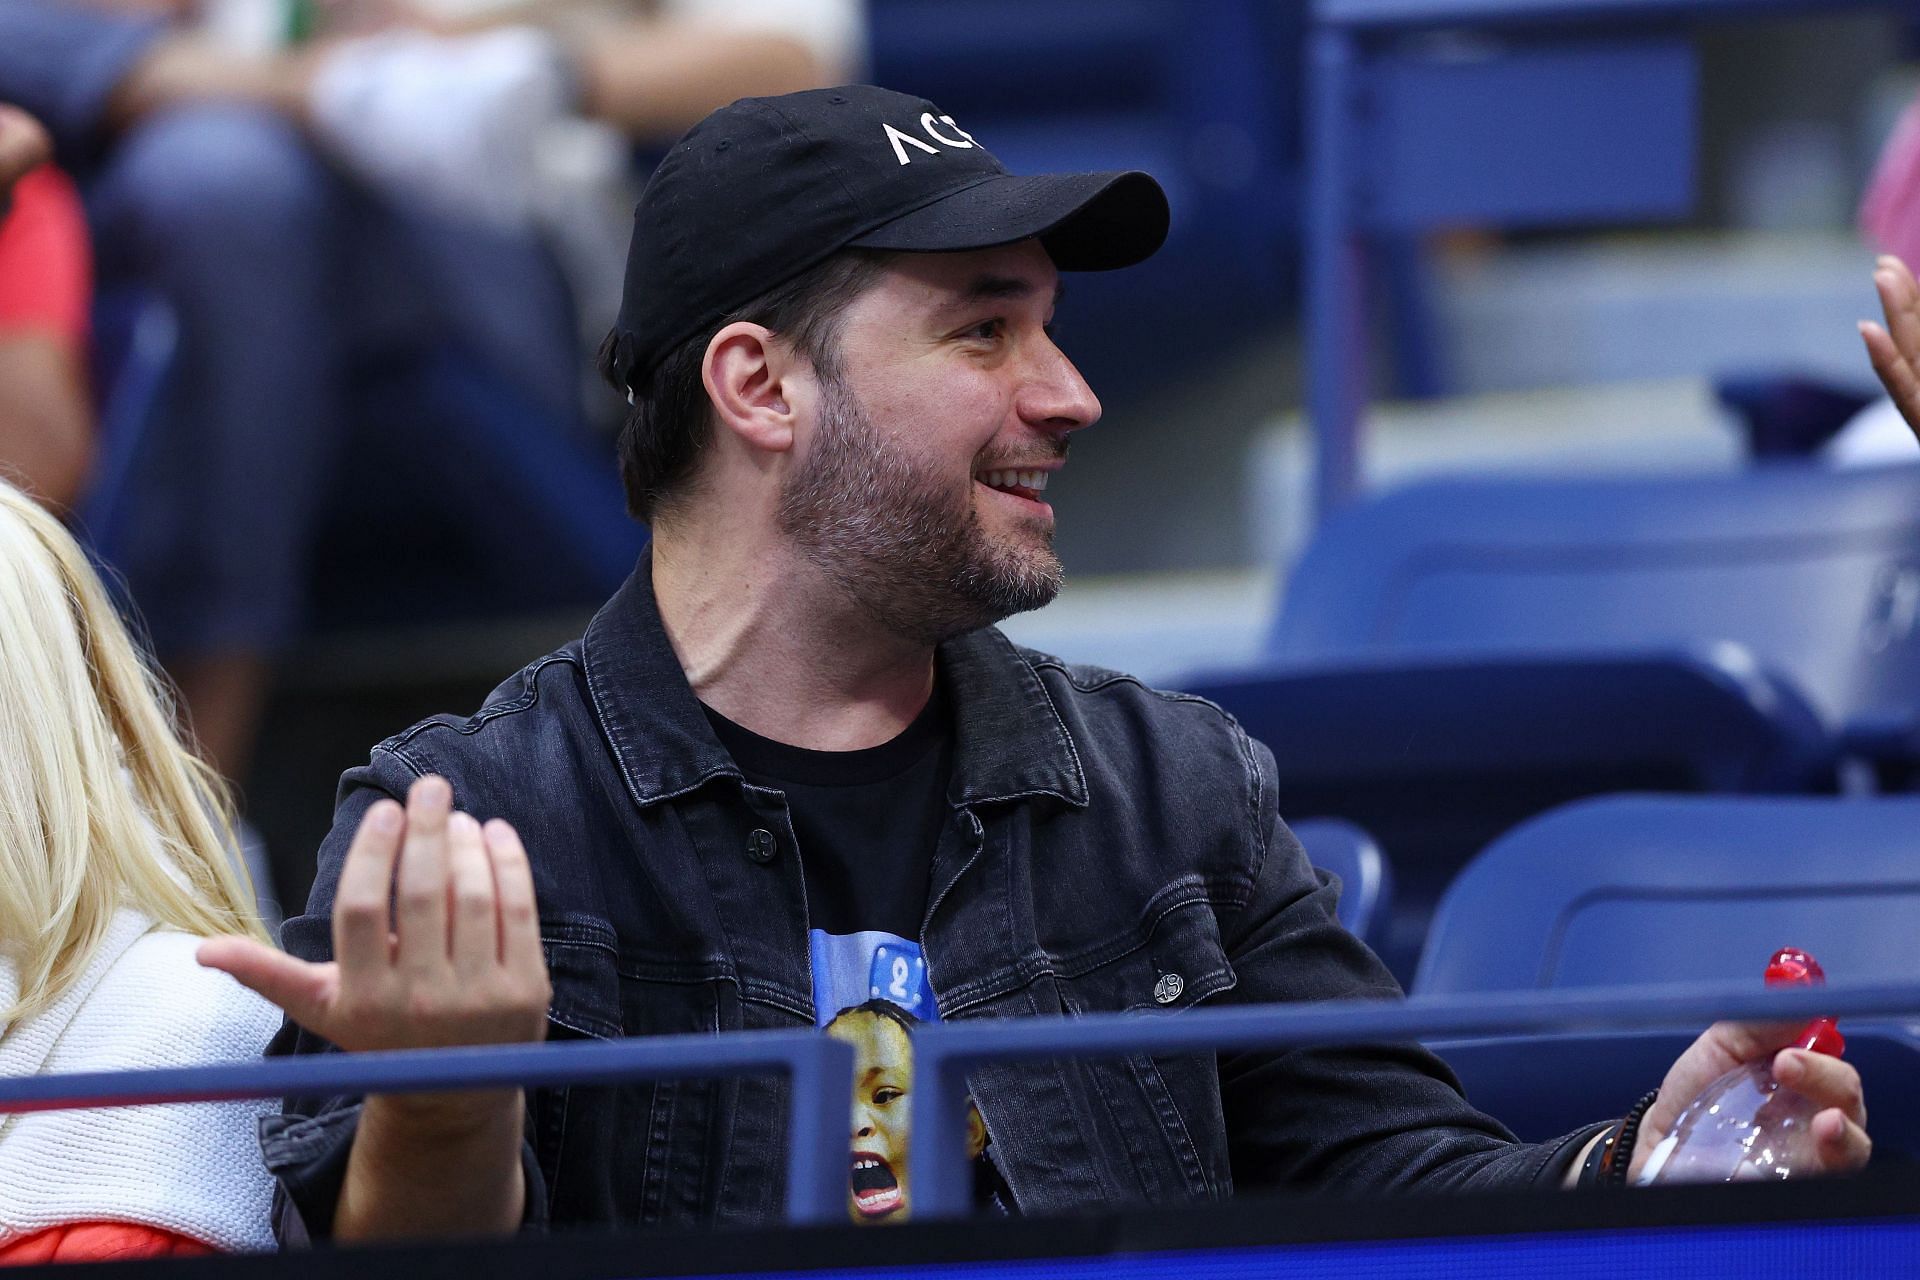 Alexis Ohanian watches Serena Williams compete at the 2022 US Open.